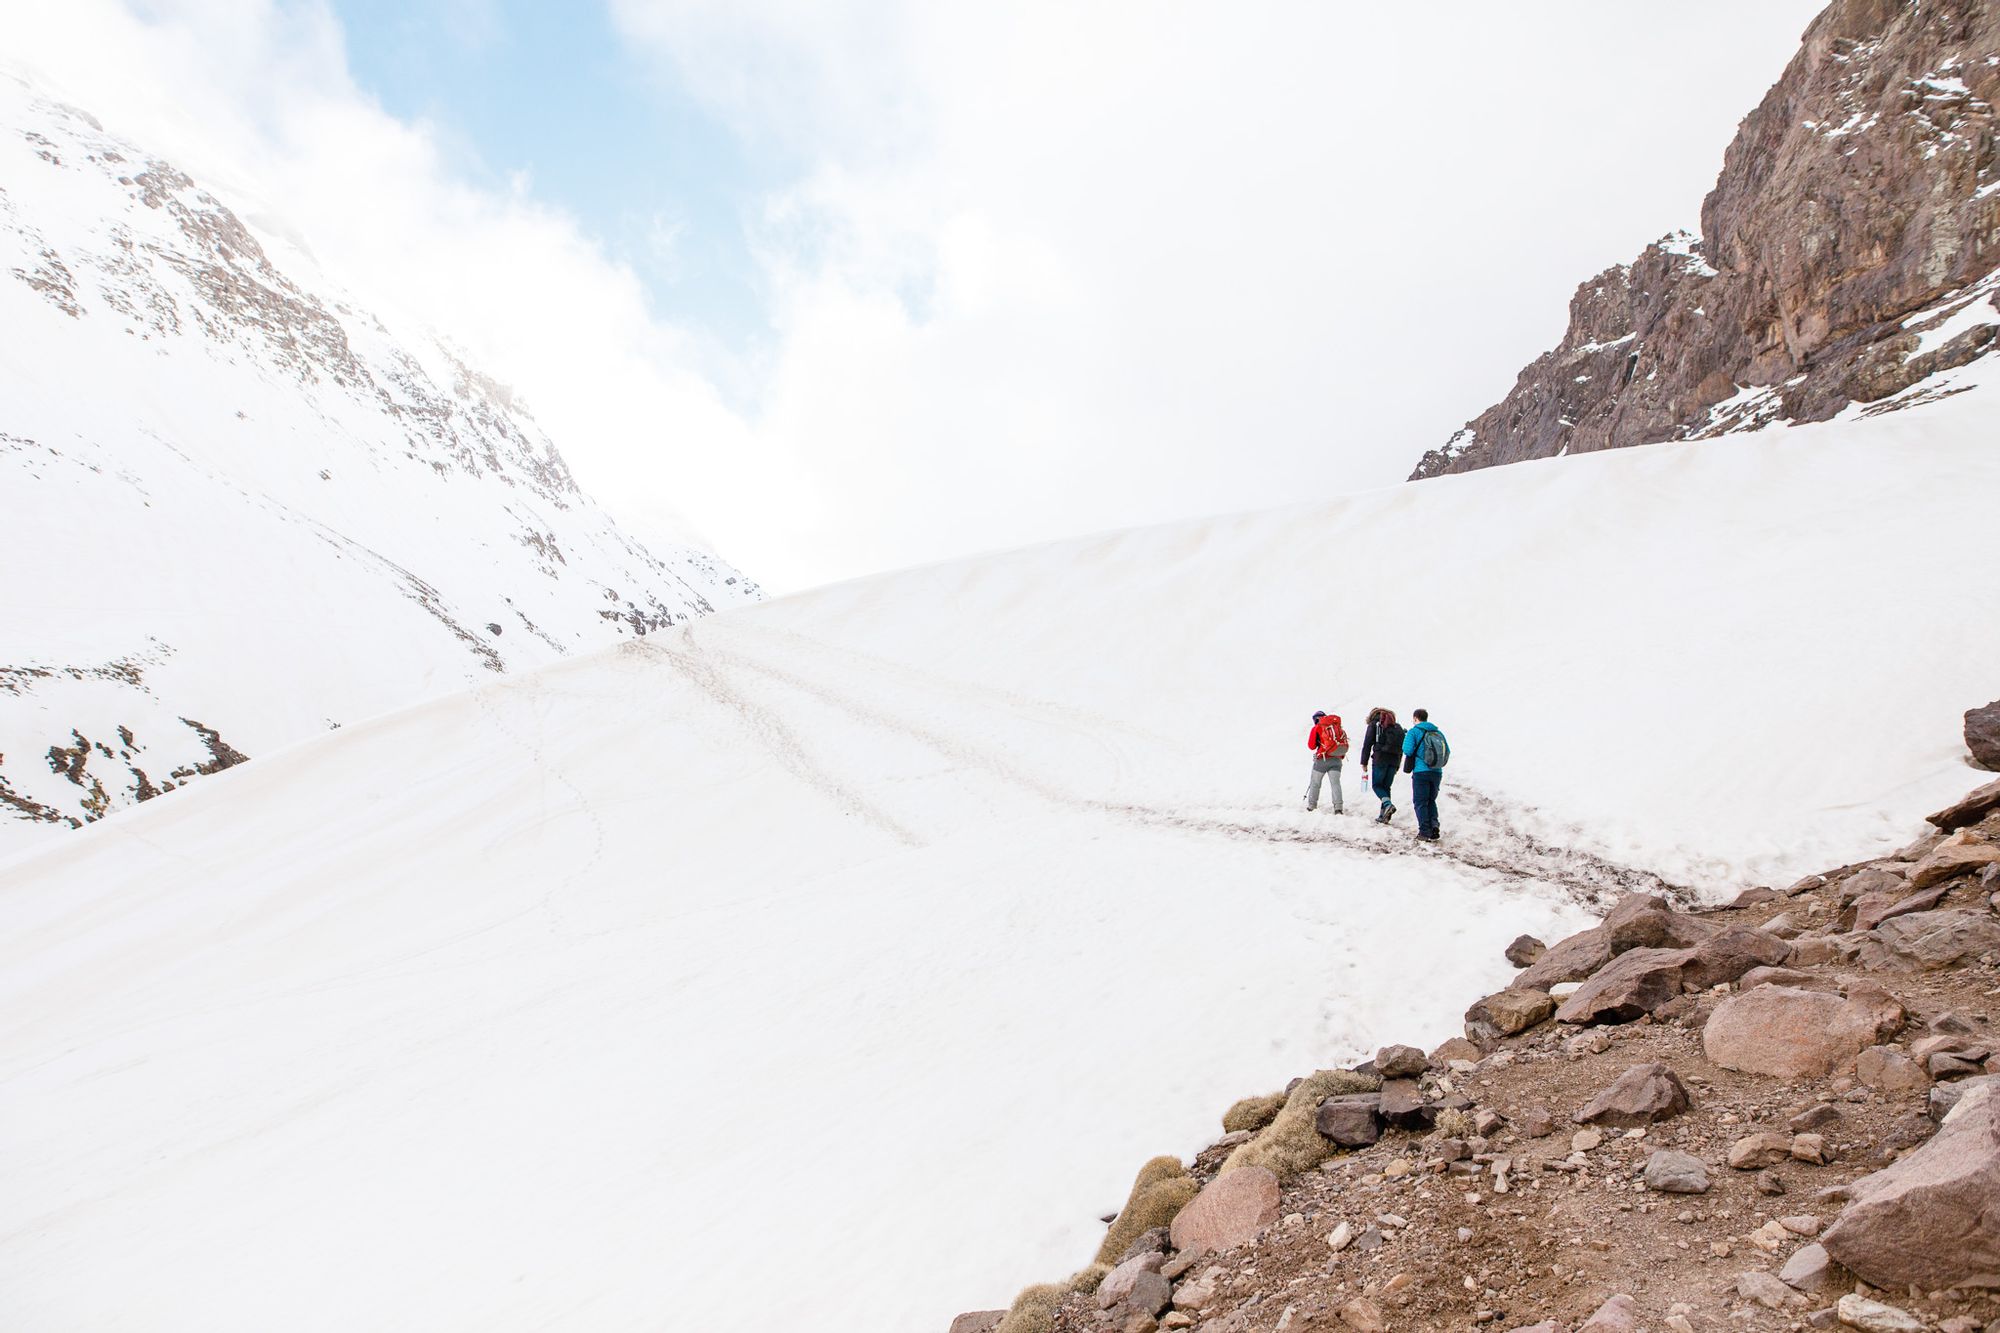 A hiking group walk across a snowy slope in the High Atlas, Morocco.